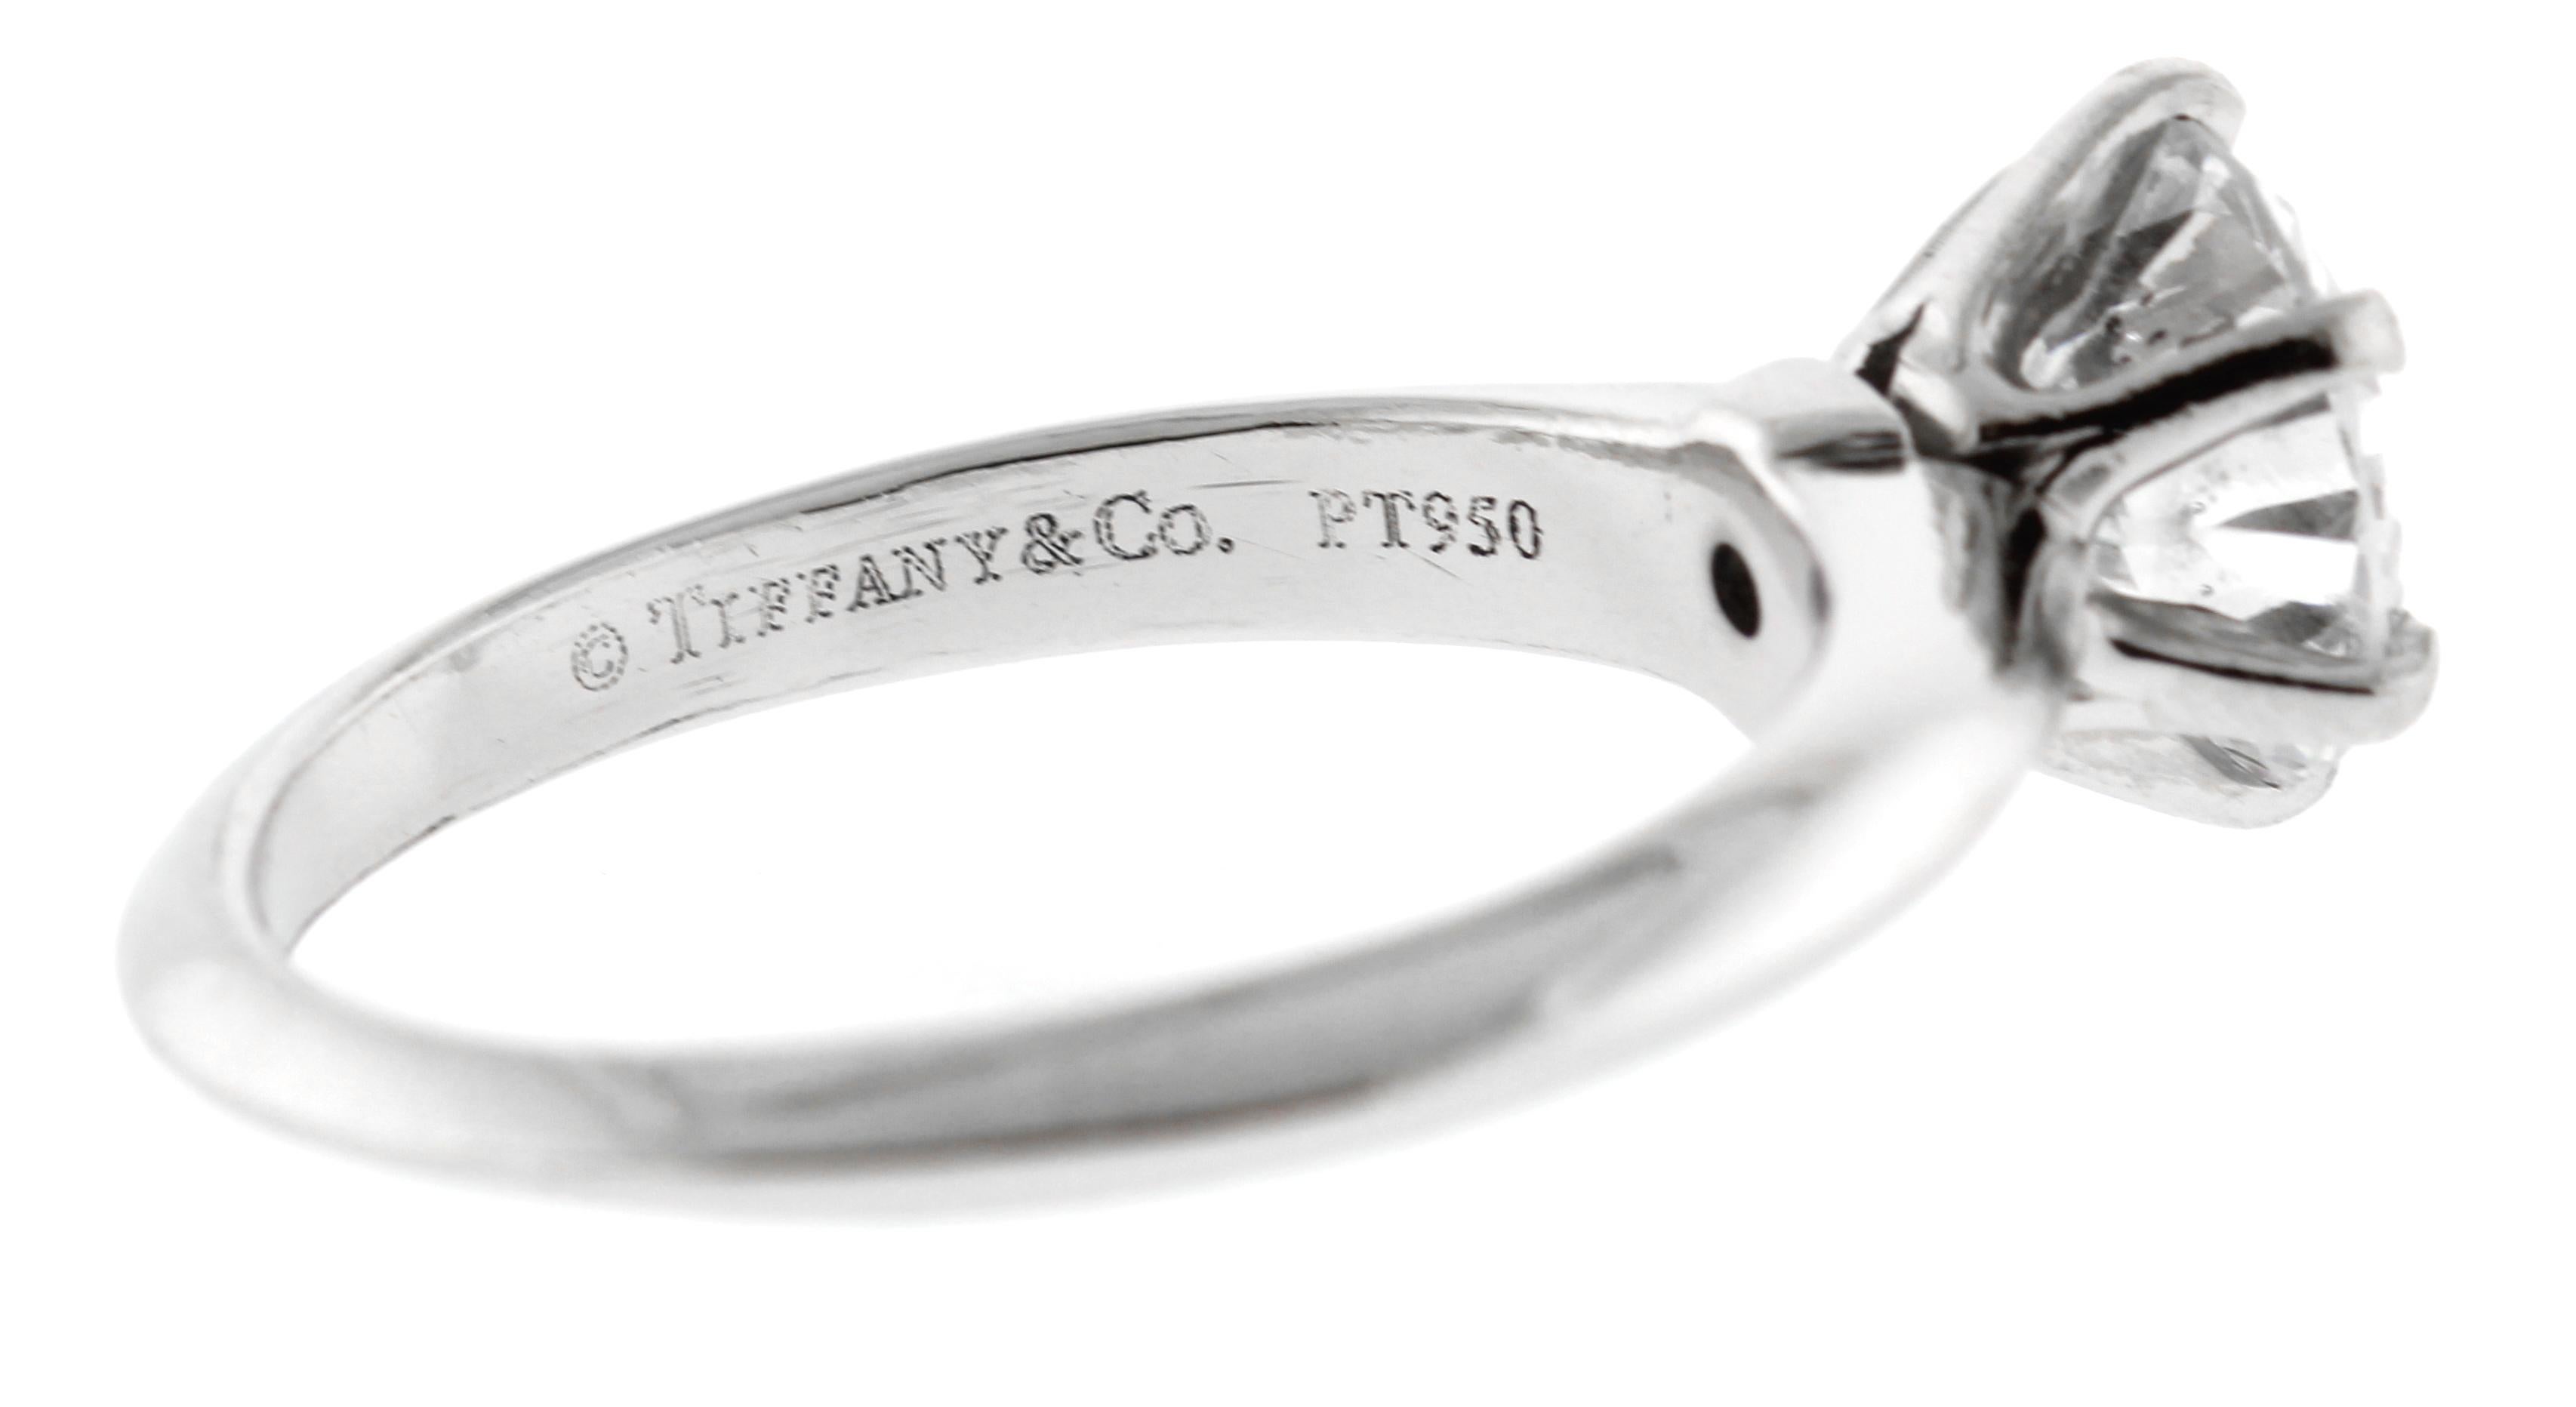 Tiffany & Co. 1.37 Carat Diamond Knife Edge Engagement Ring  In Excellent Condition For Sale In Bethesda, MD